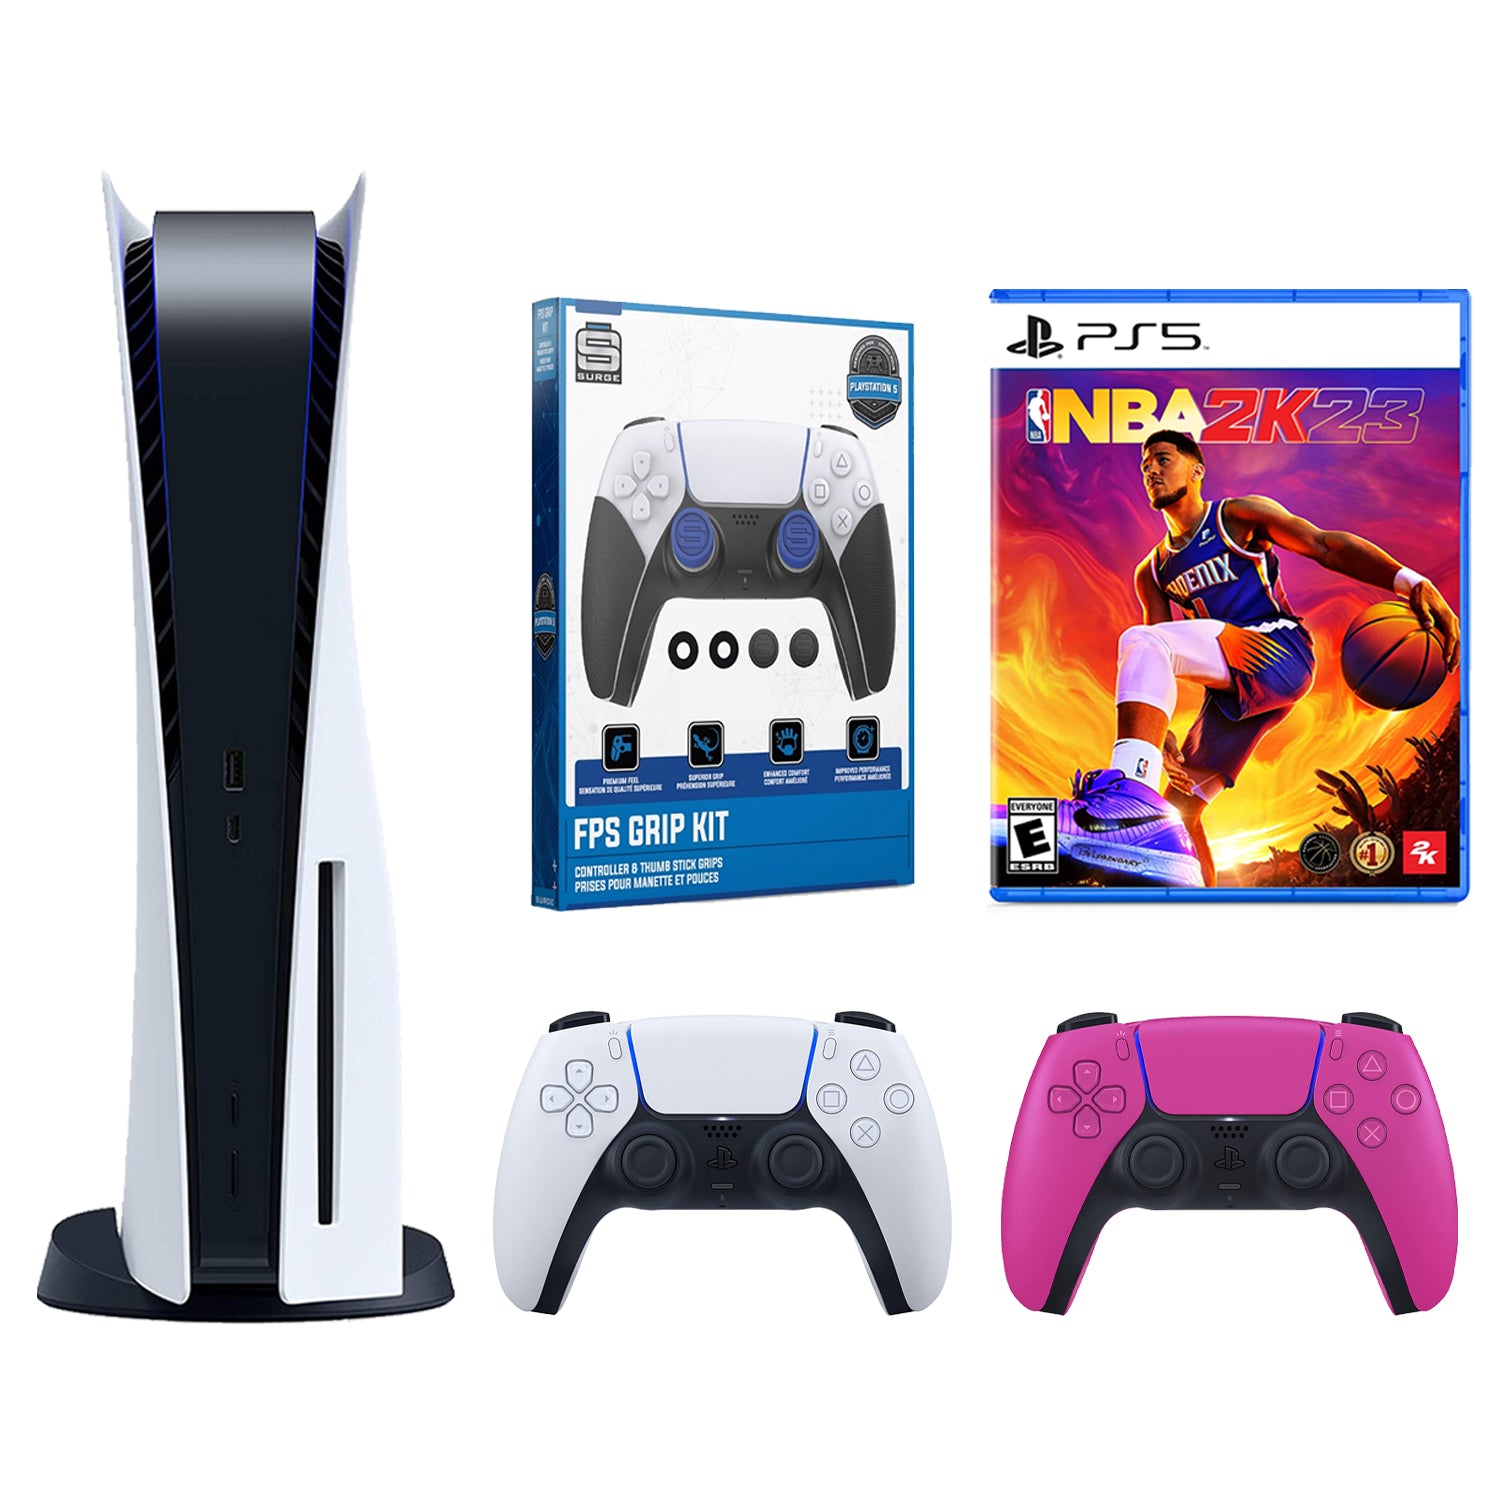 Sony Playstation 5 Disc with NBA 2K23, Extra Controller and FPS Grip Kit Bundle - Nova Pink - Pro-Distributing